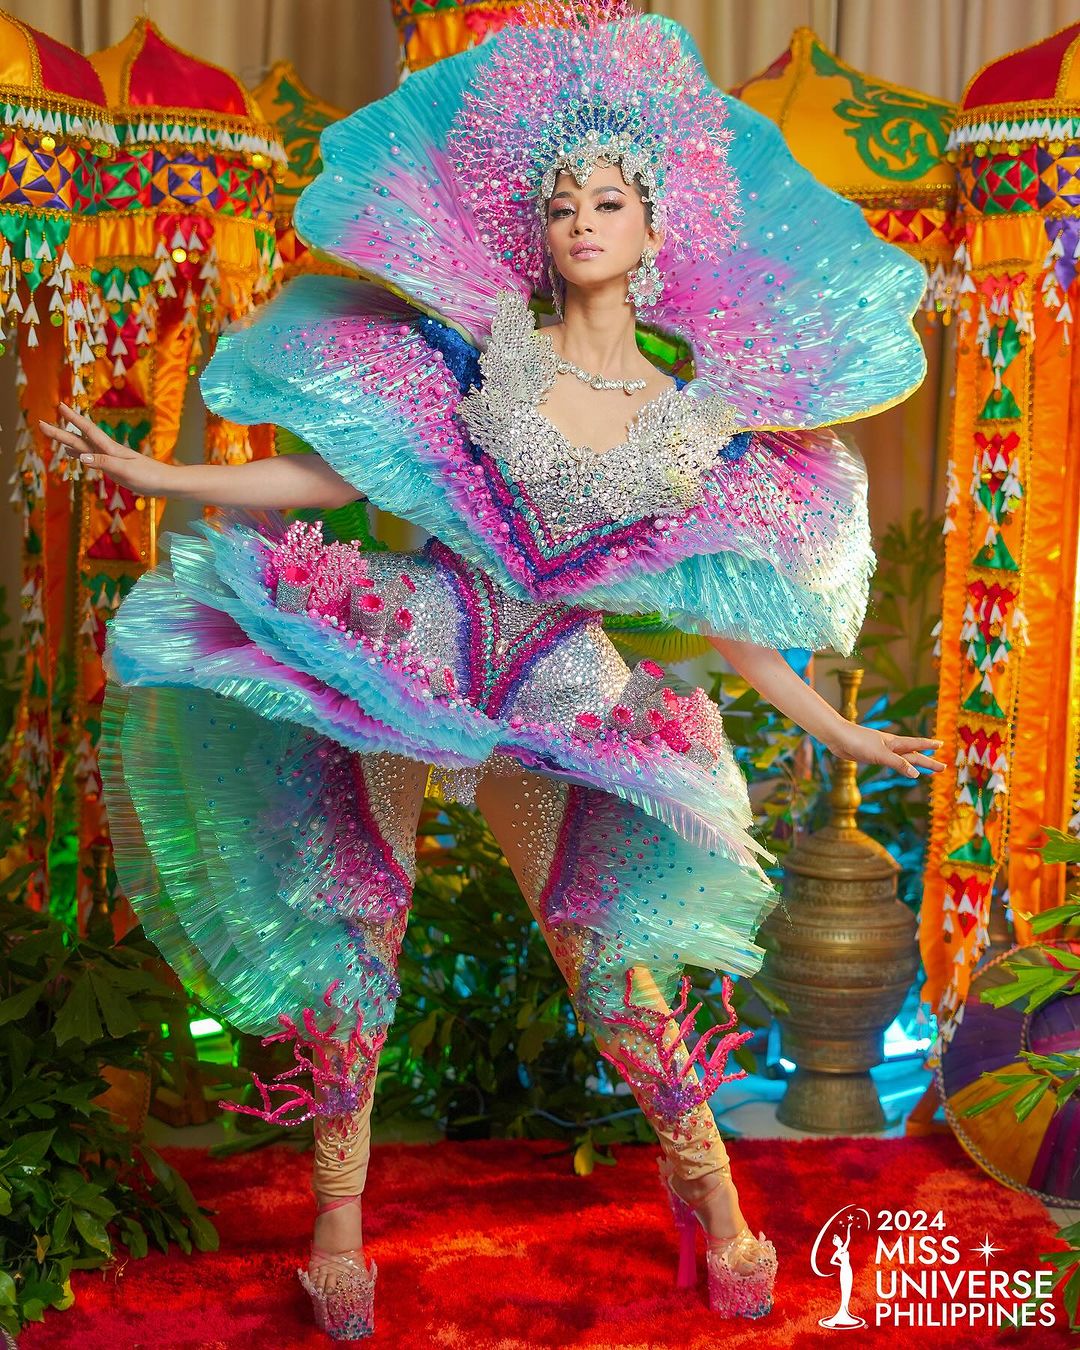 Miss Universe Philippines 2024 national costume Juvel Ducay of Bantayan Island